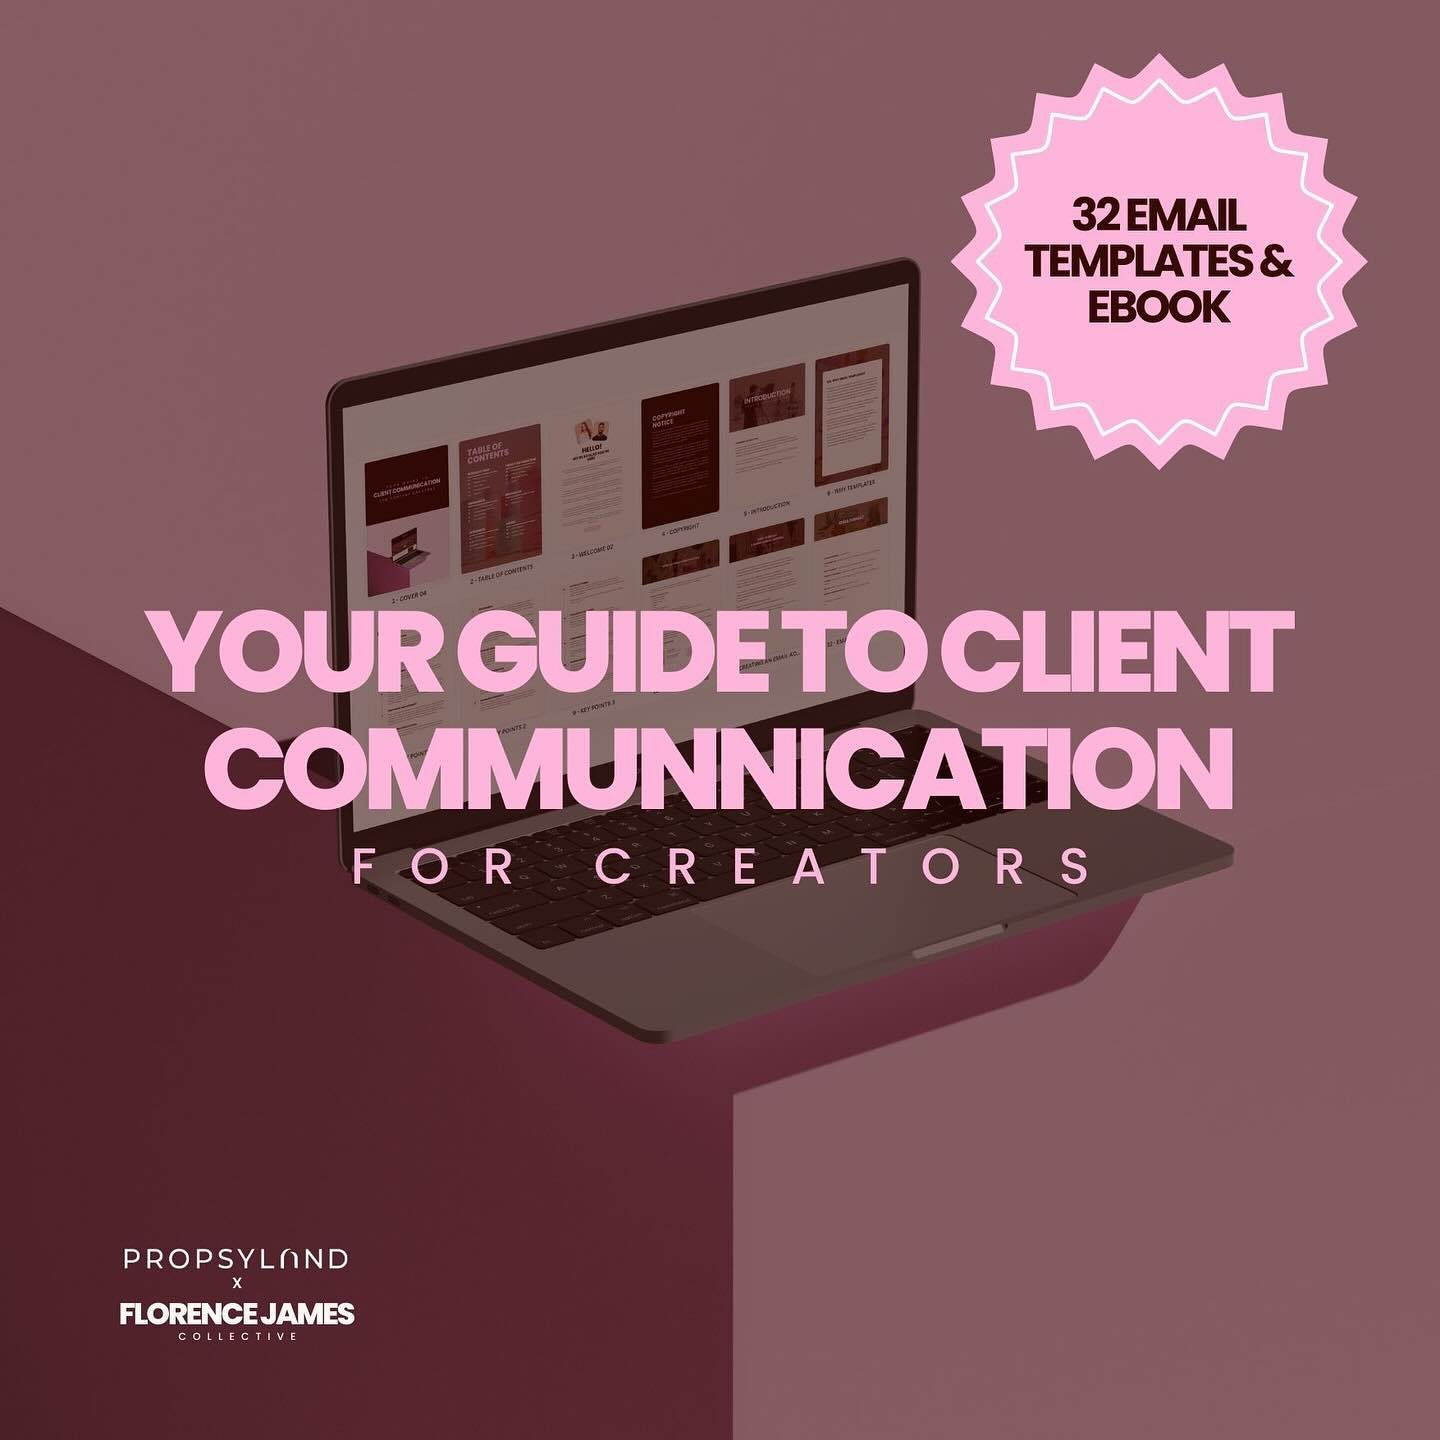 ✨We launched our very first Ebook!! ✨

Introducing &ldquo;Your Guide To Client Communication&rdquo; for creators! 

If you&rsquo;re anything like me, you&rsquo;ve probably experienced email anxiety once or twice in your business. After countless hour